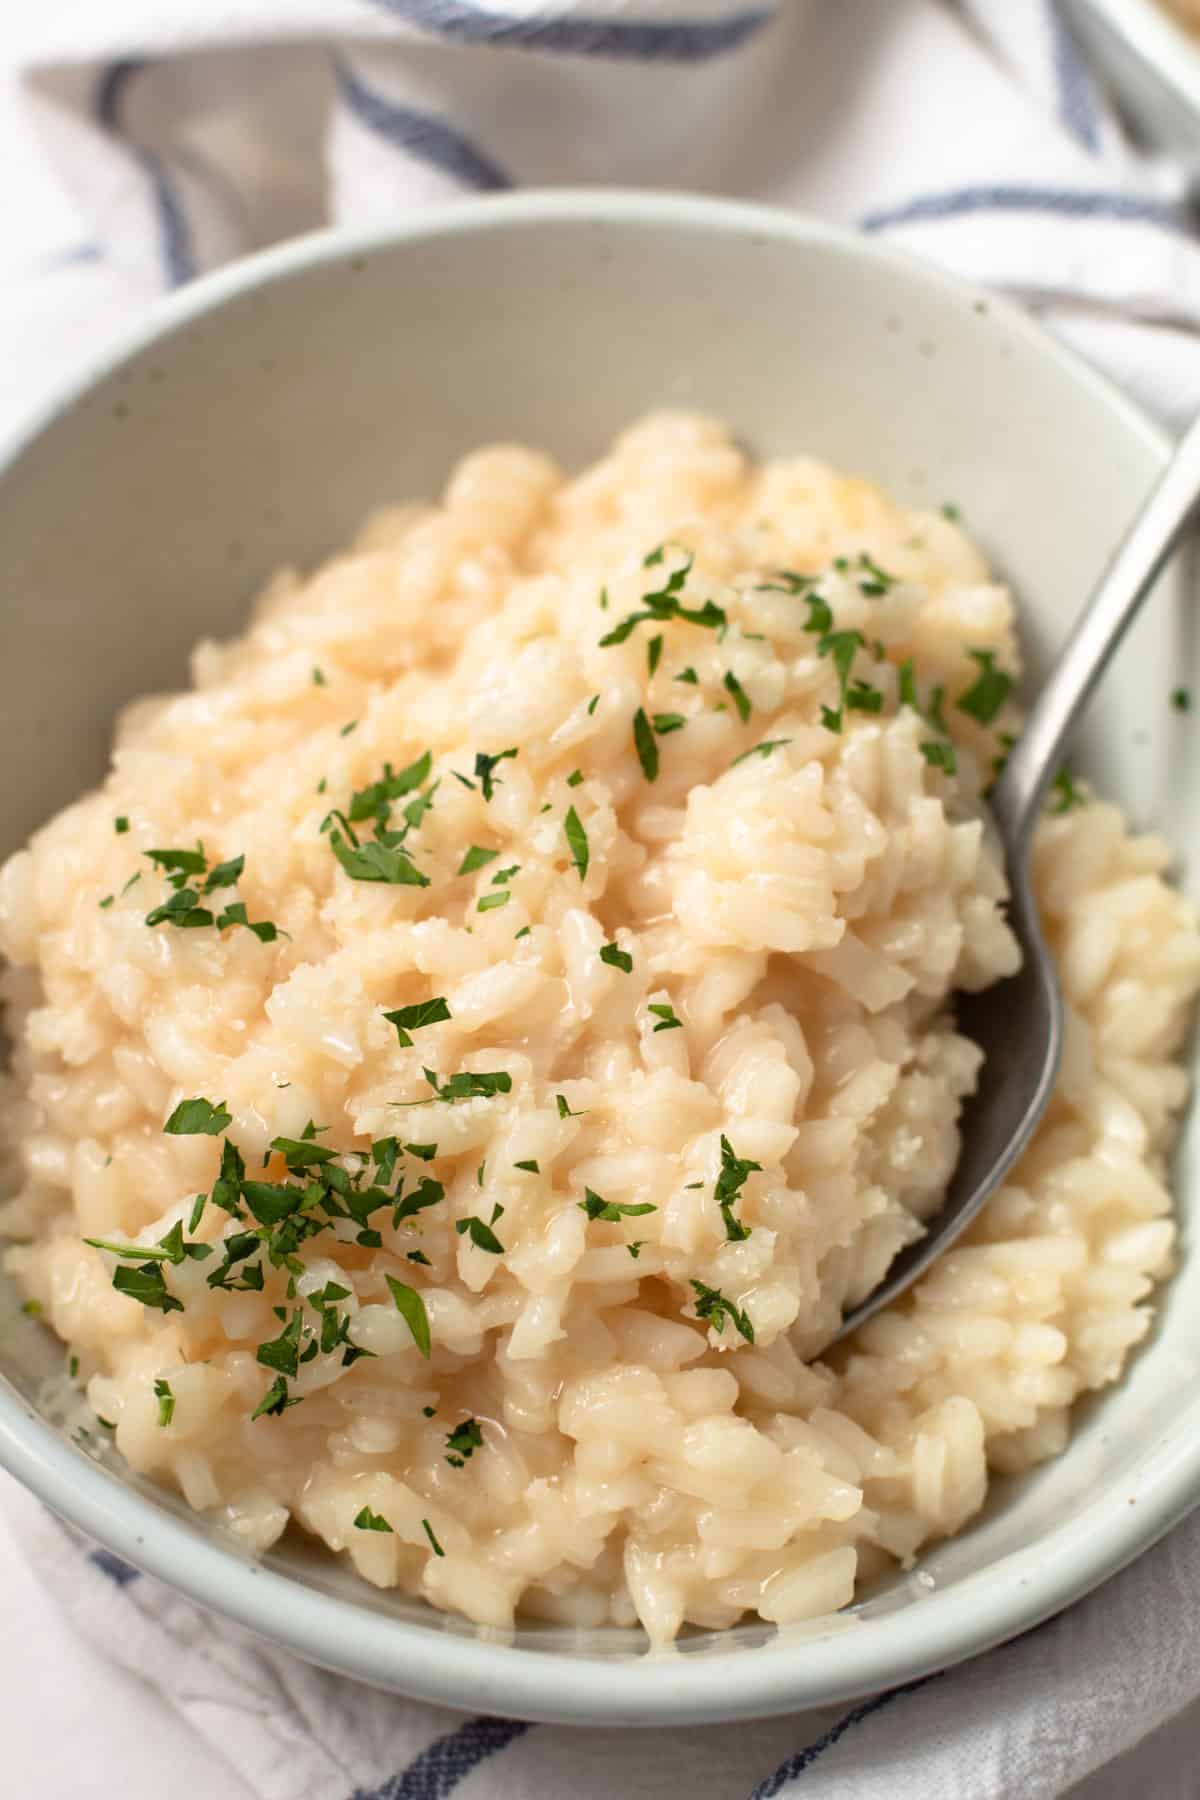 How to Make Risotto | Lexi's Clean Kitchen